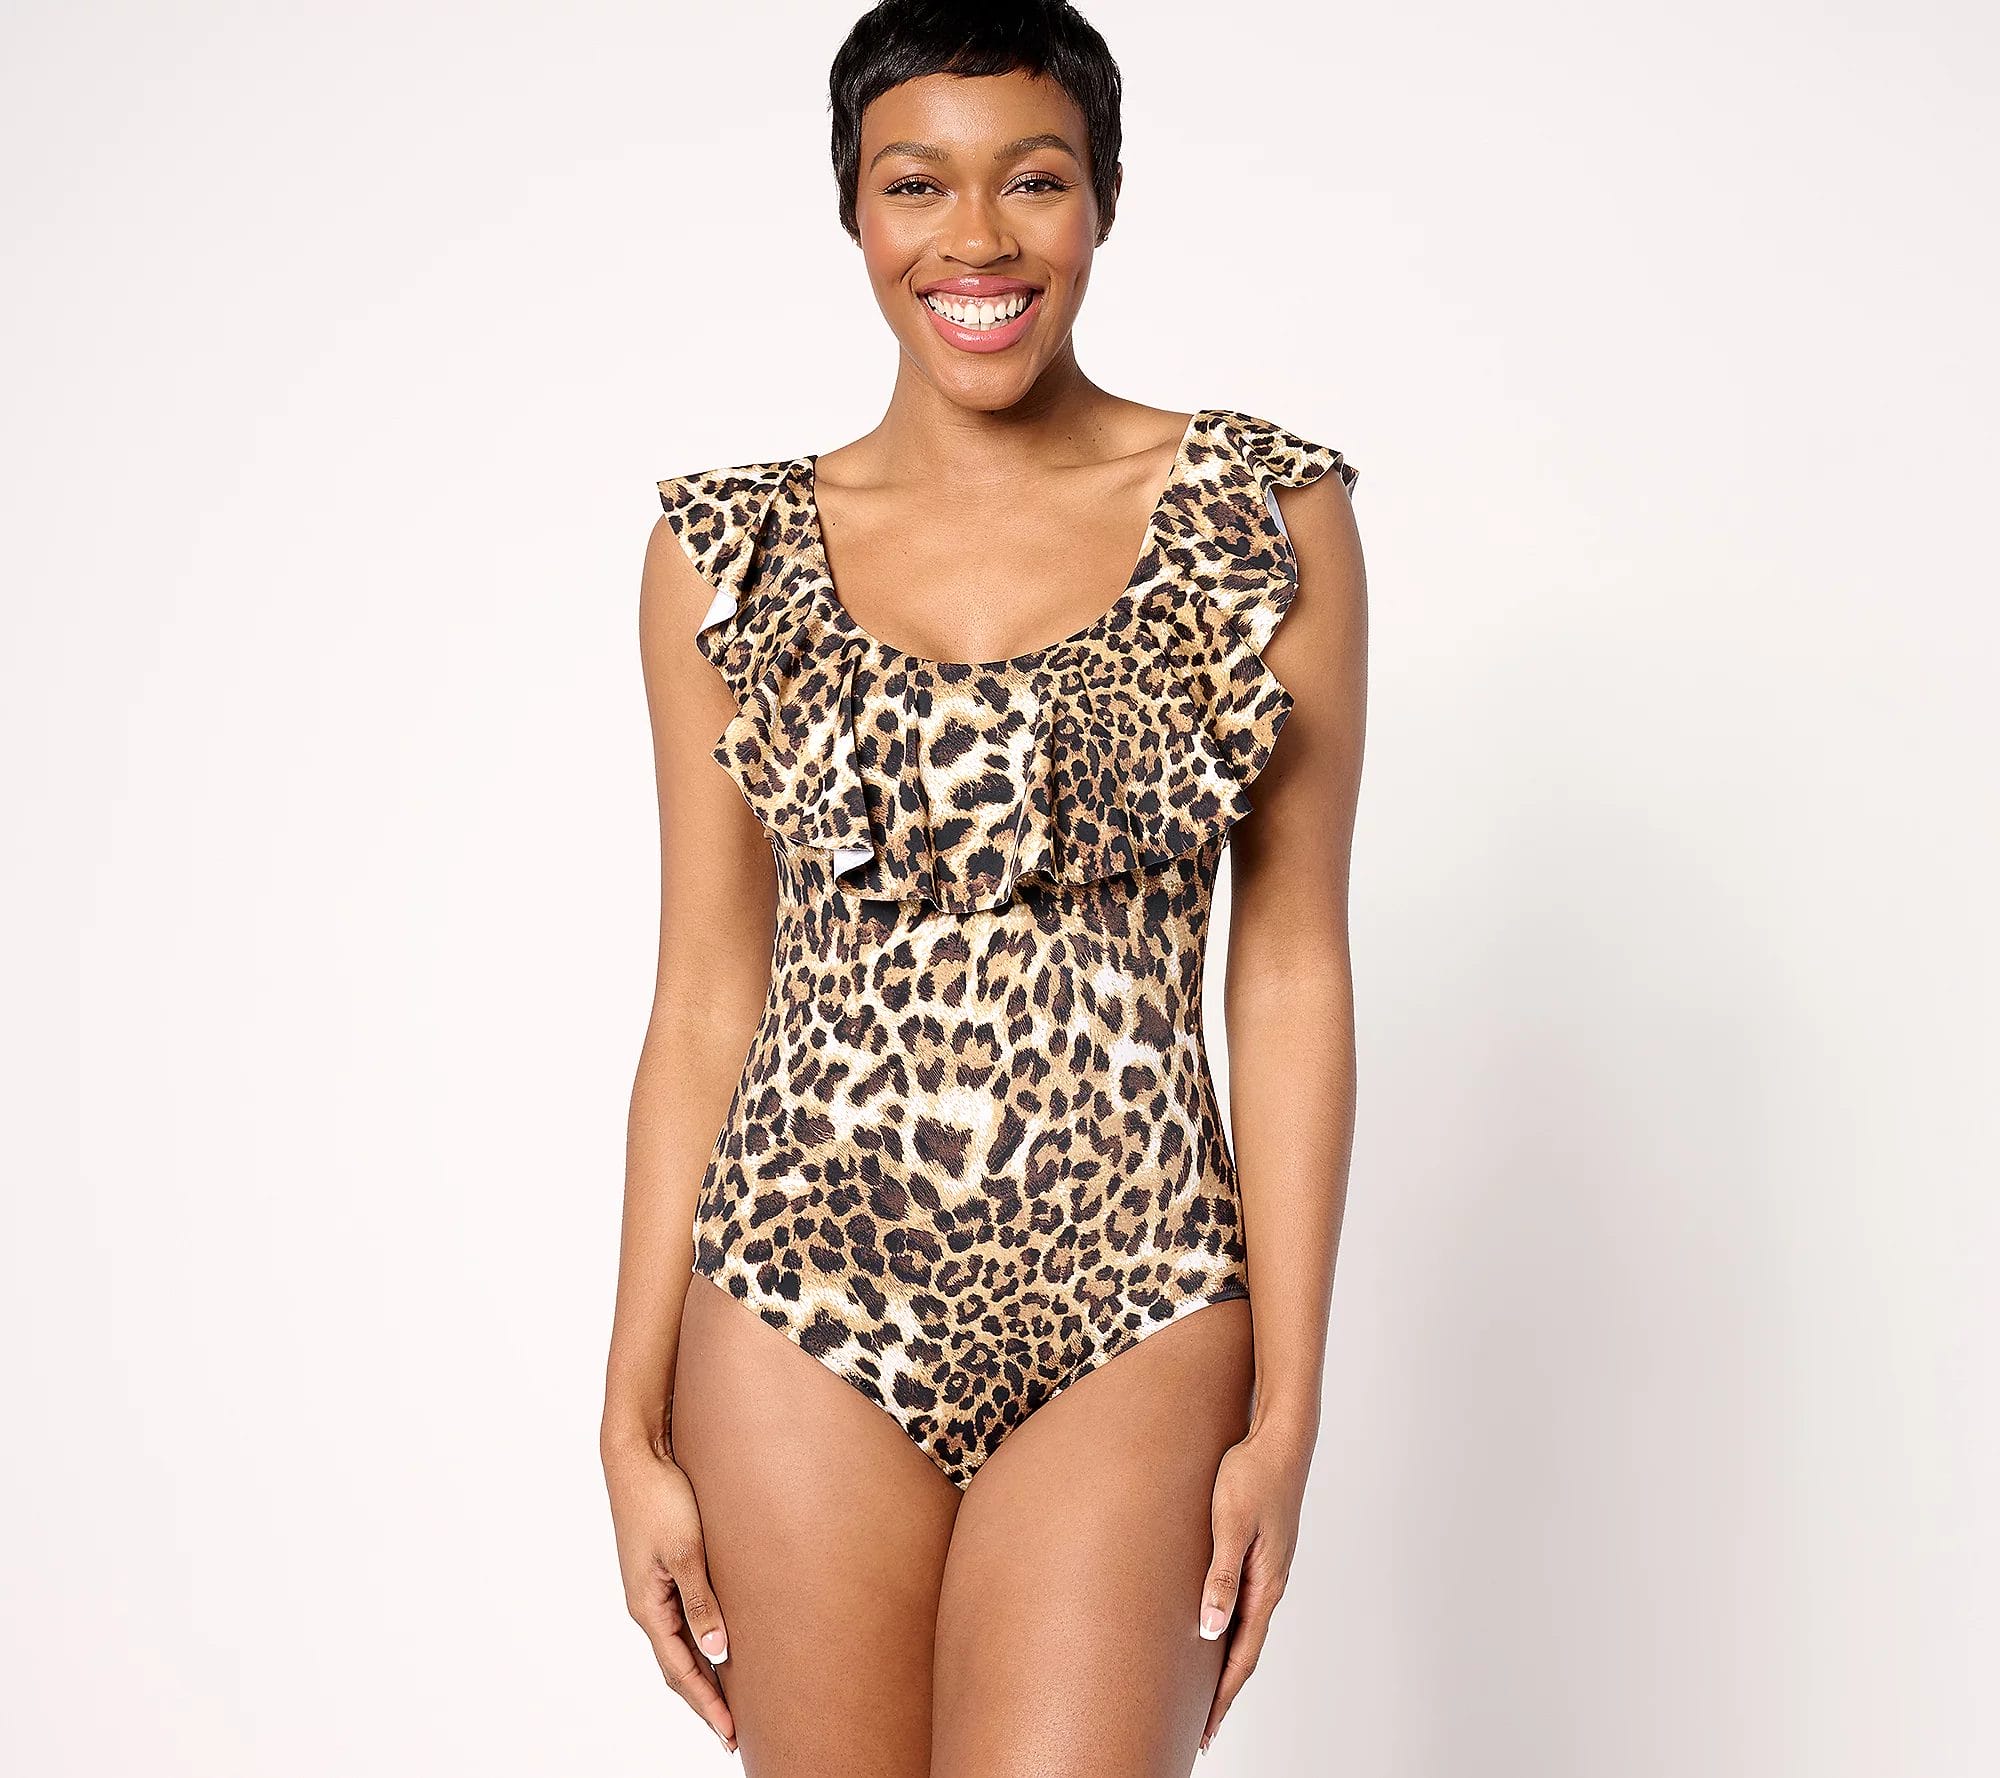 A637480 Tummy Control Ruffle One-Piece Swimsuit